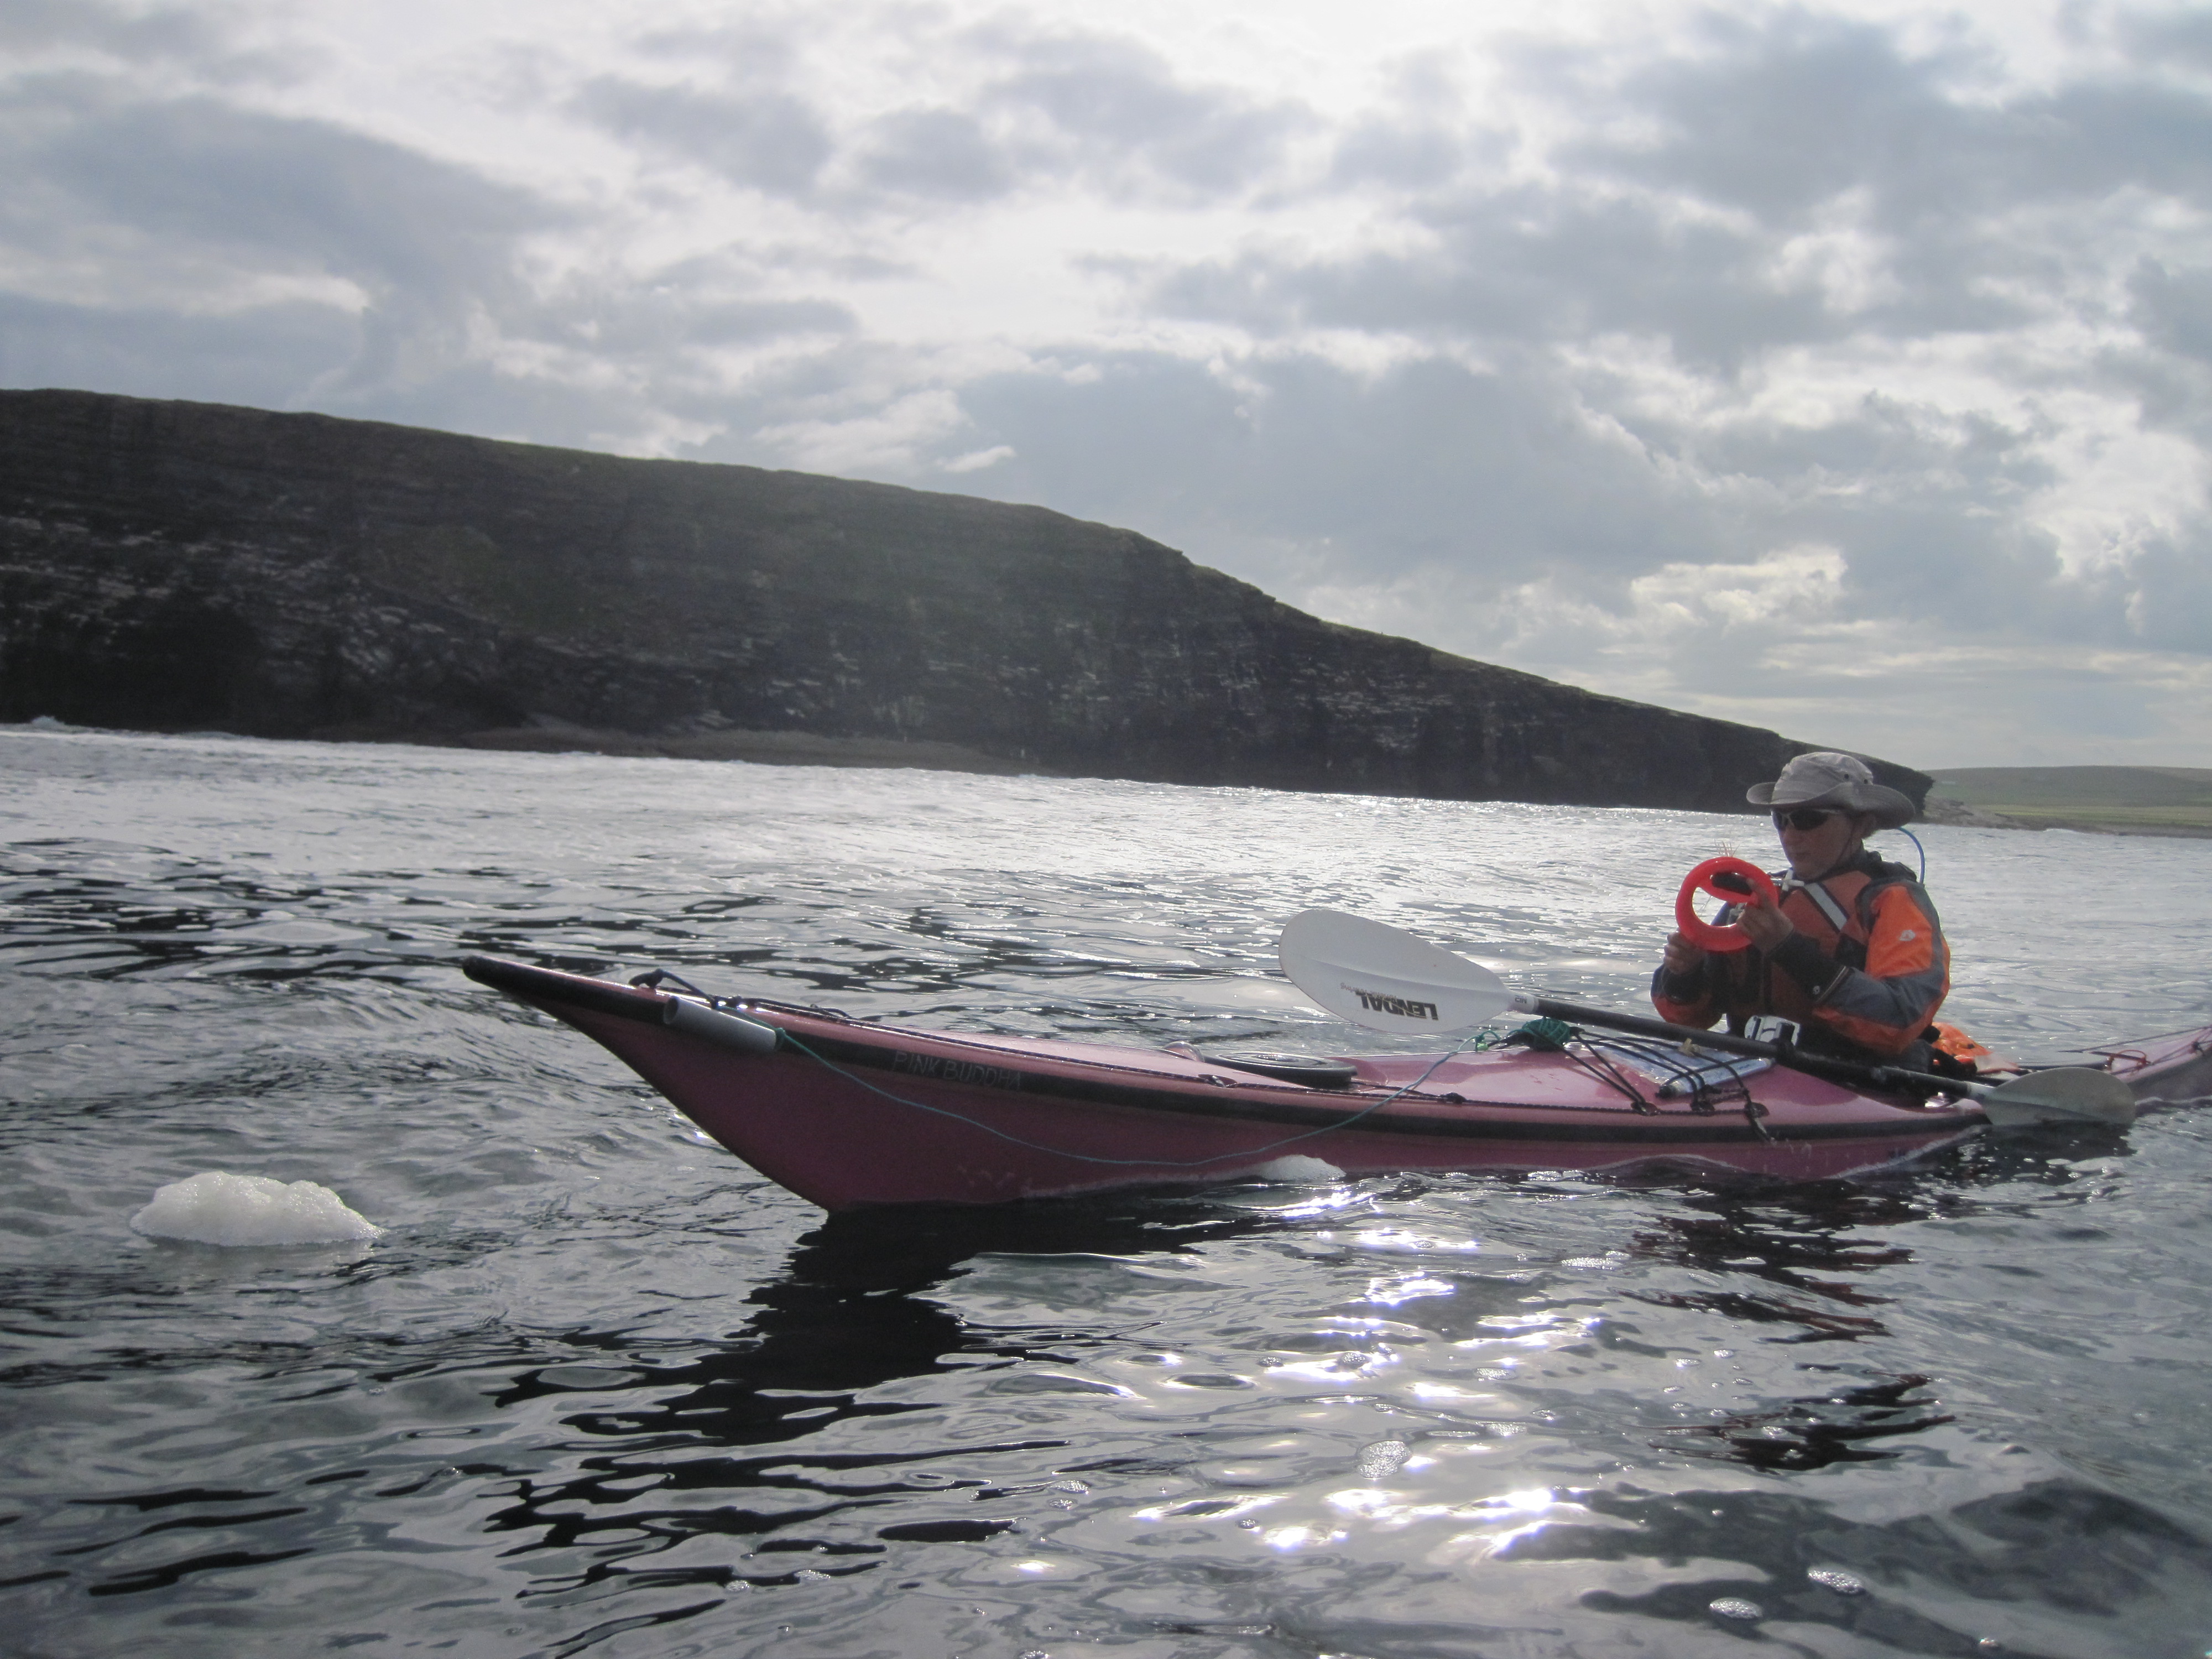 Charlotte Gannet fishing with a hand spool in her kayak.